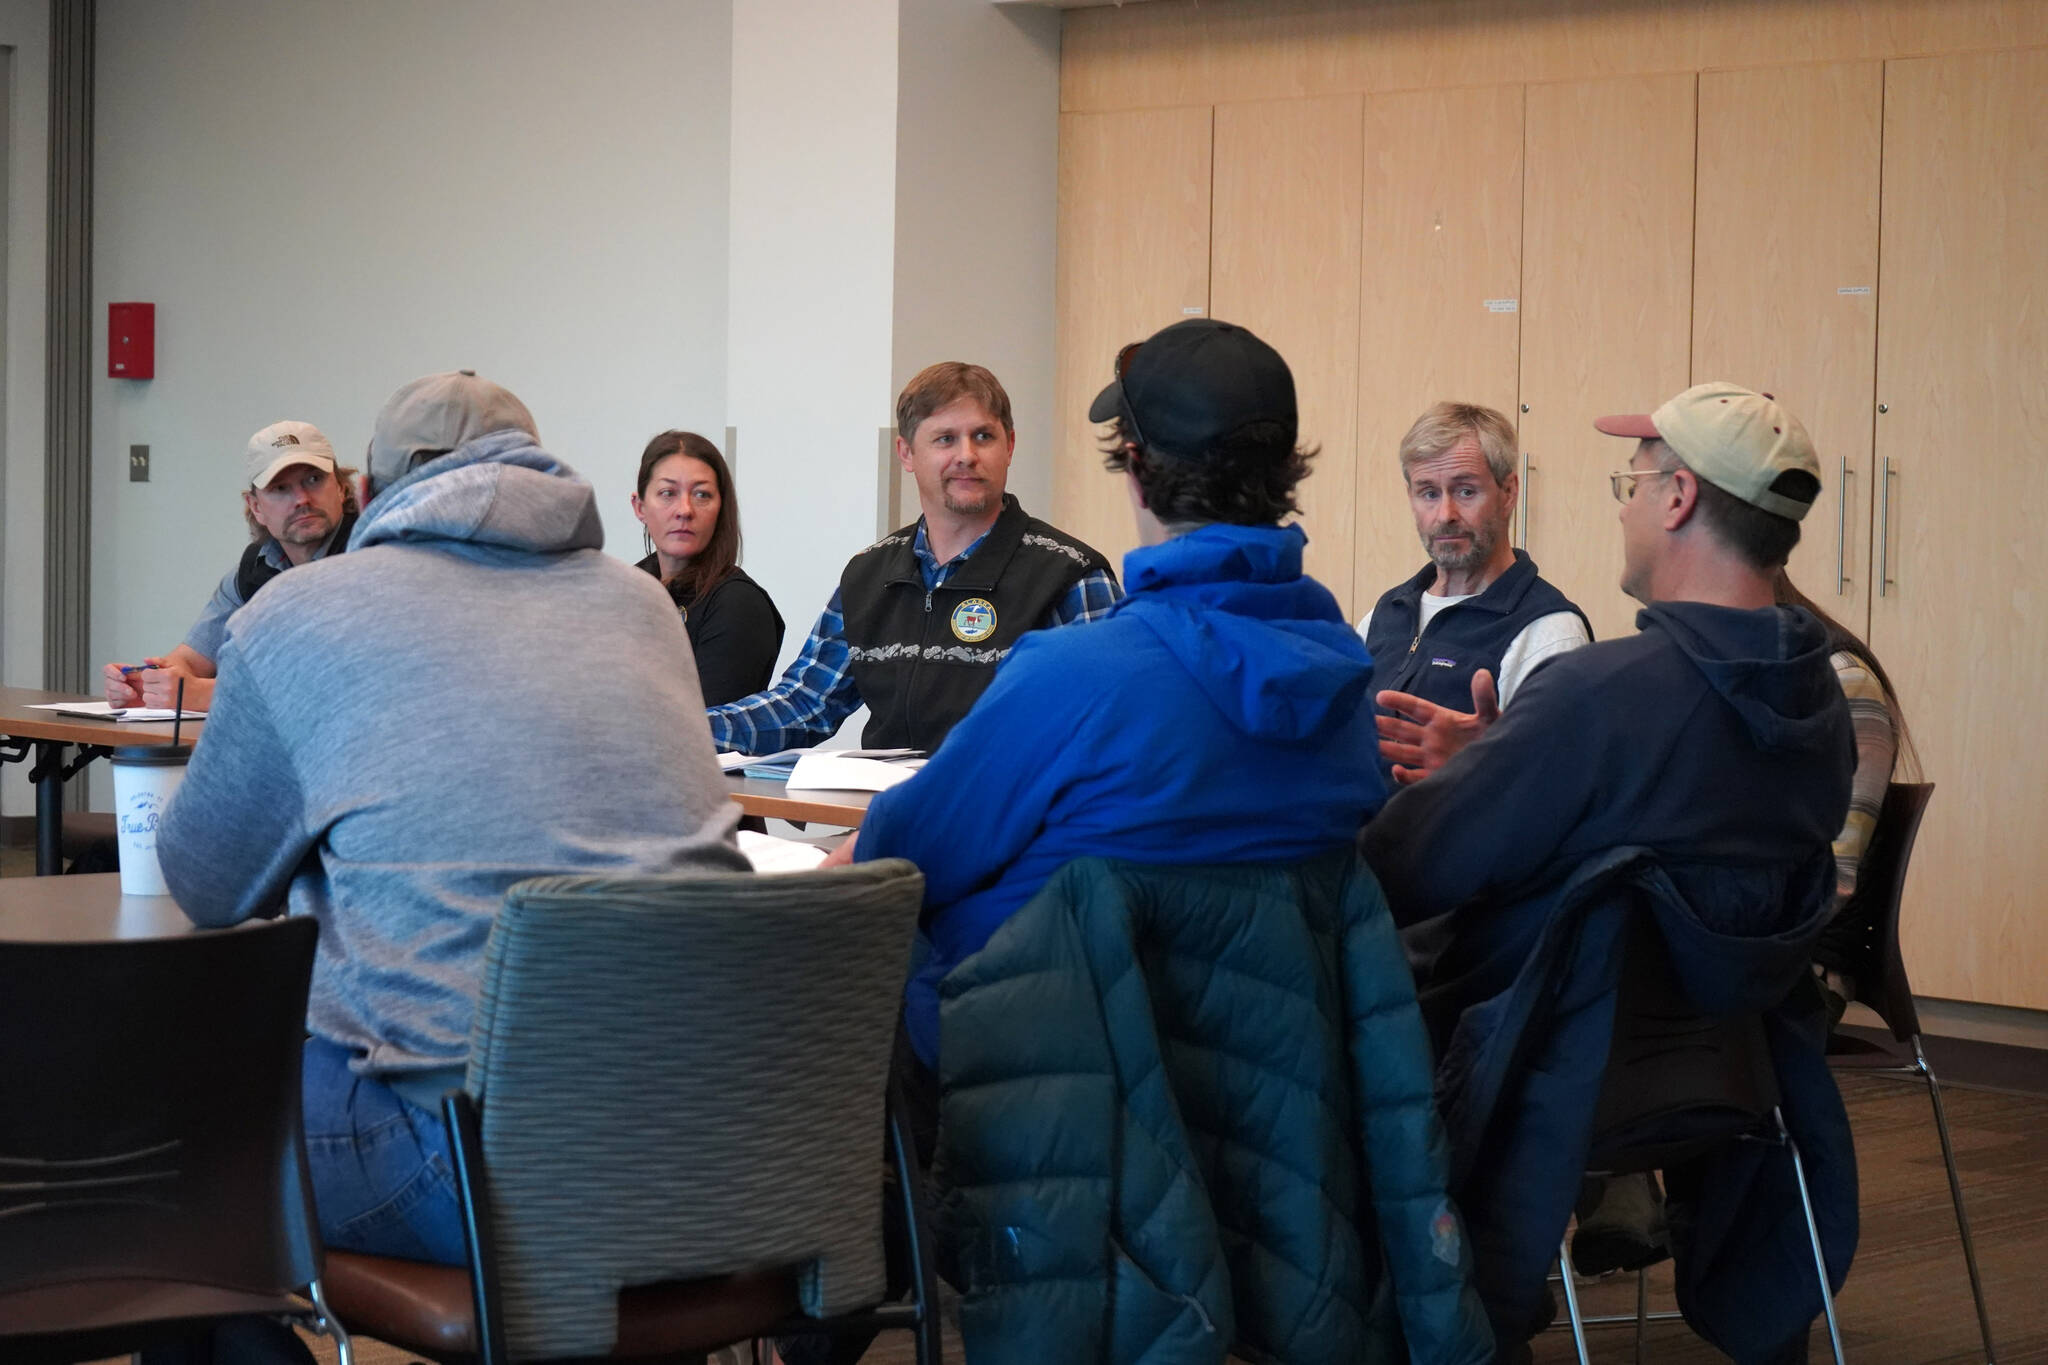 Members of the State Department of Fish and Game’s Division of Sport Fish listen to questions at a “Town Hall Style Meeting” held at Soldotna Public Library in Soldotna, Alaska, on Thursday, Oct. 26, 2023. (Jake Dye/Peninsula Clarion)